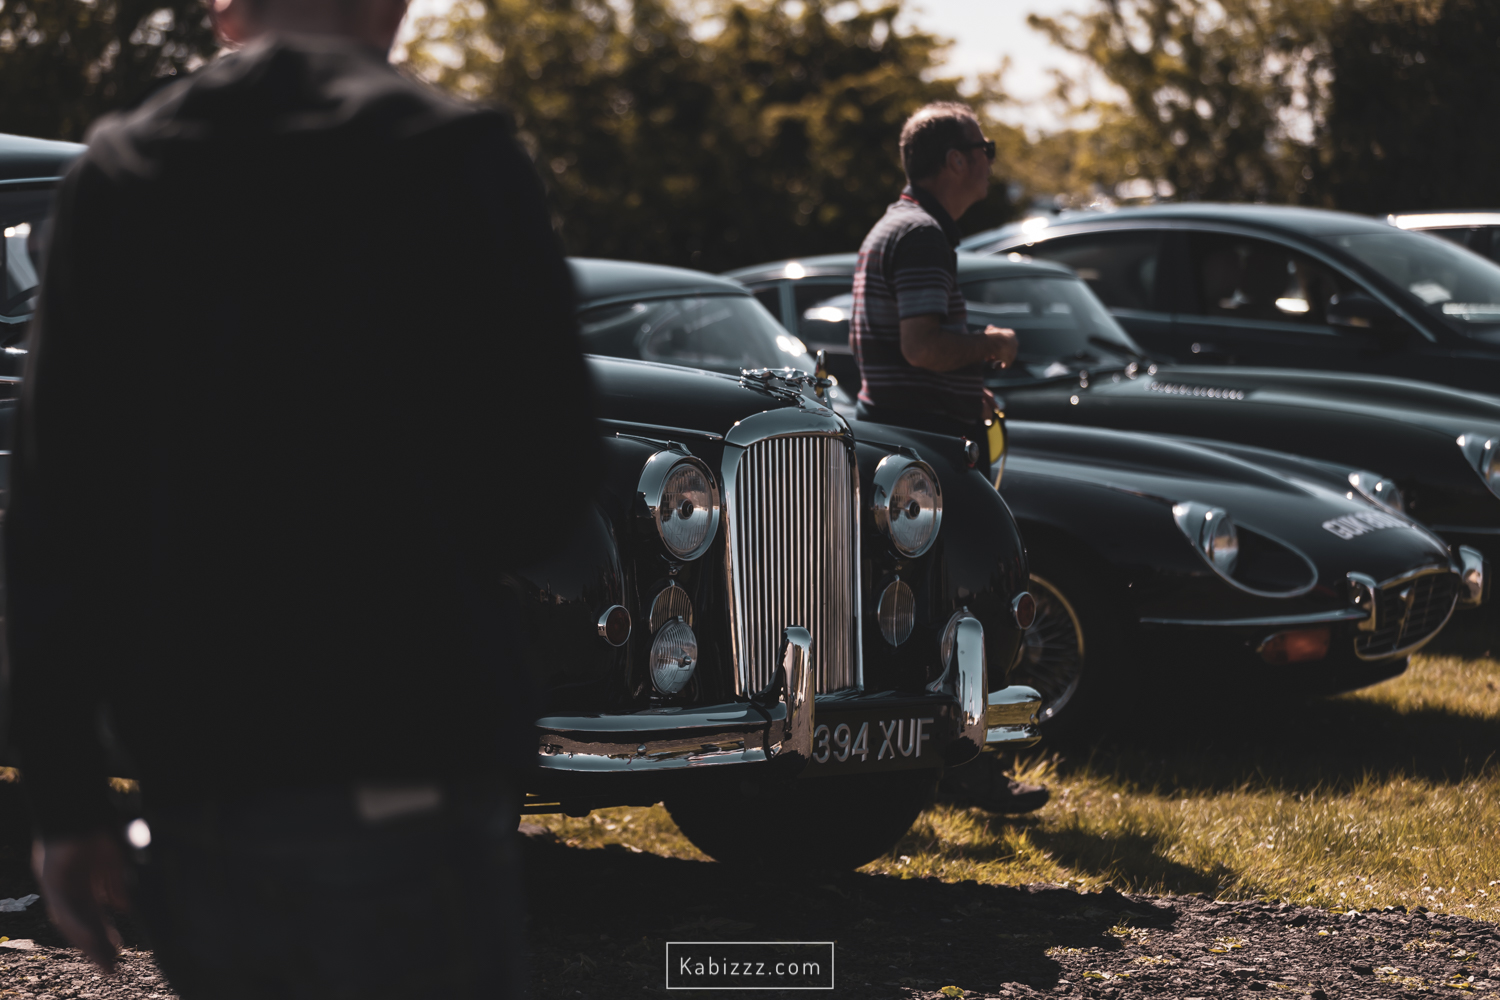 Kabizzz_Photography_Stirling_District_Classic _cars-20.jpg